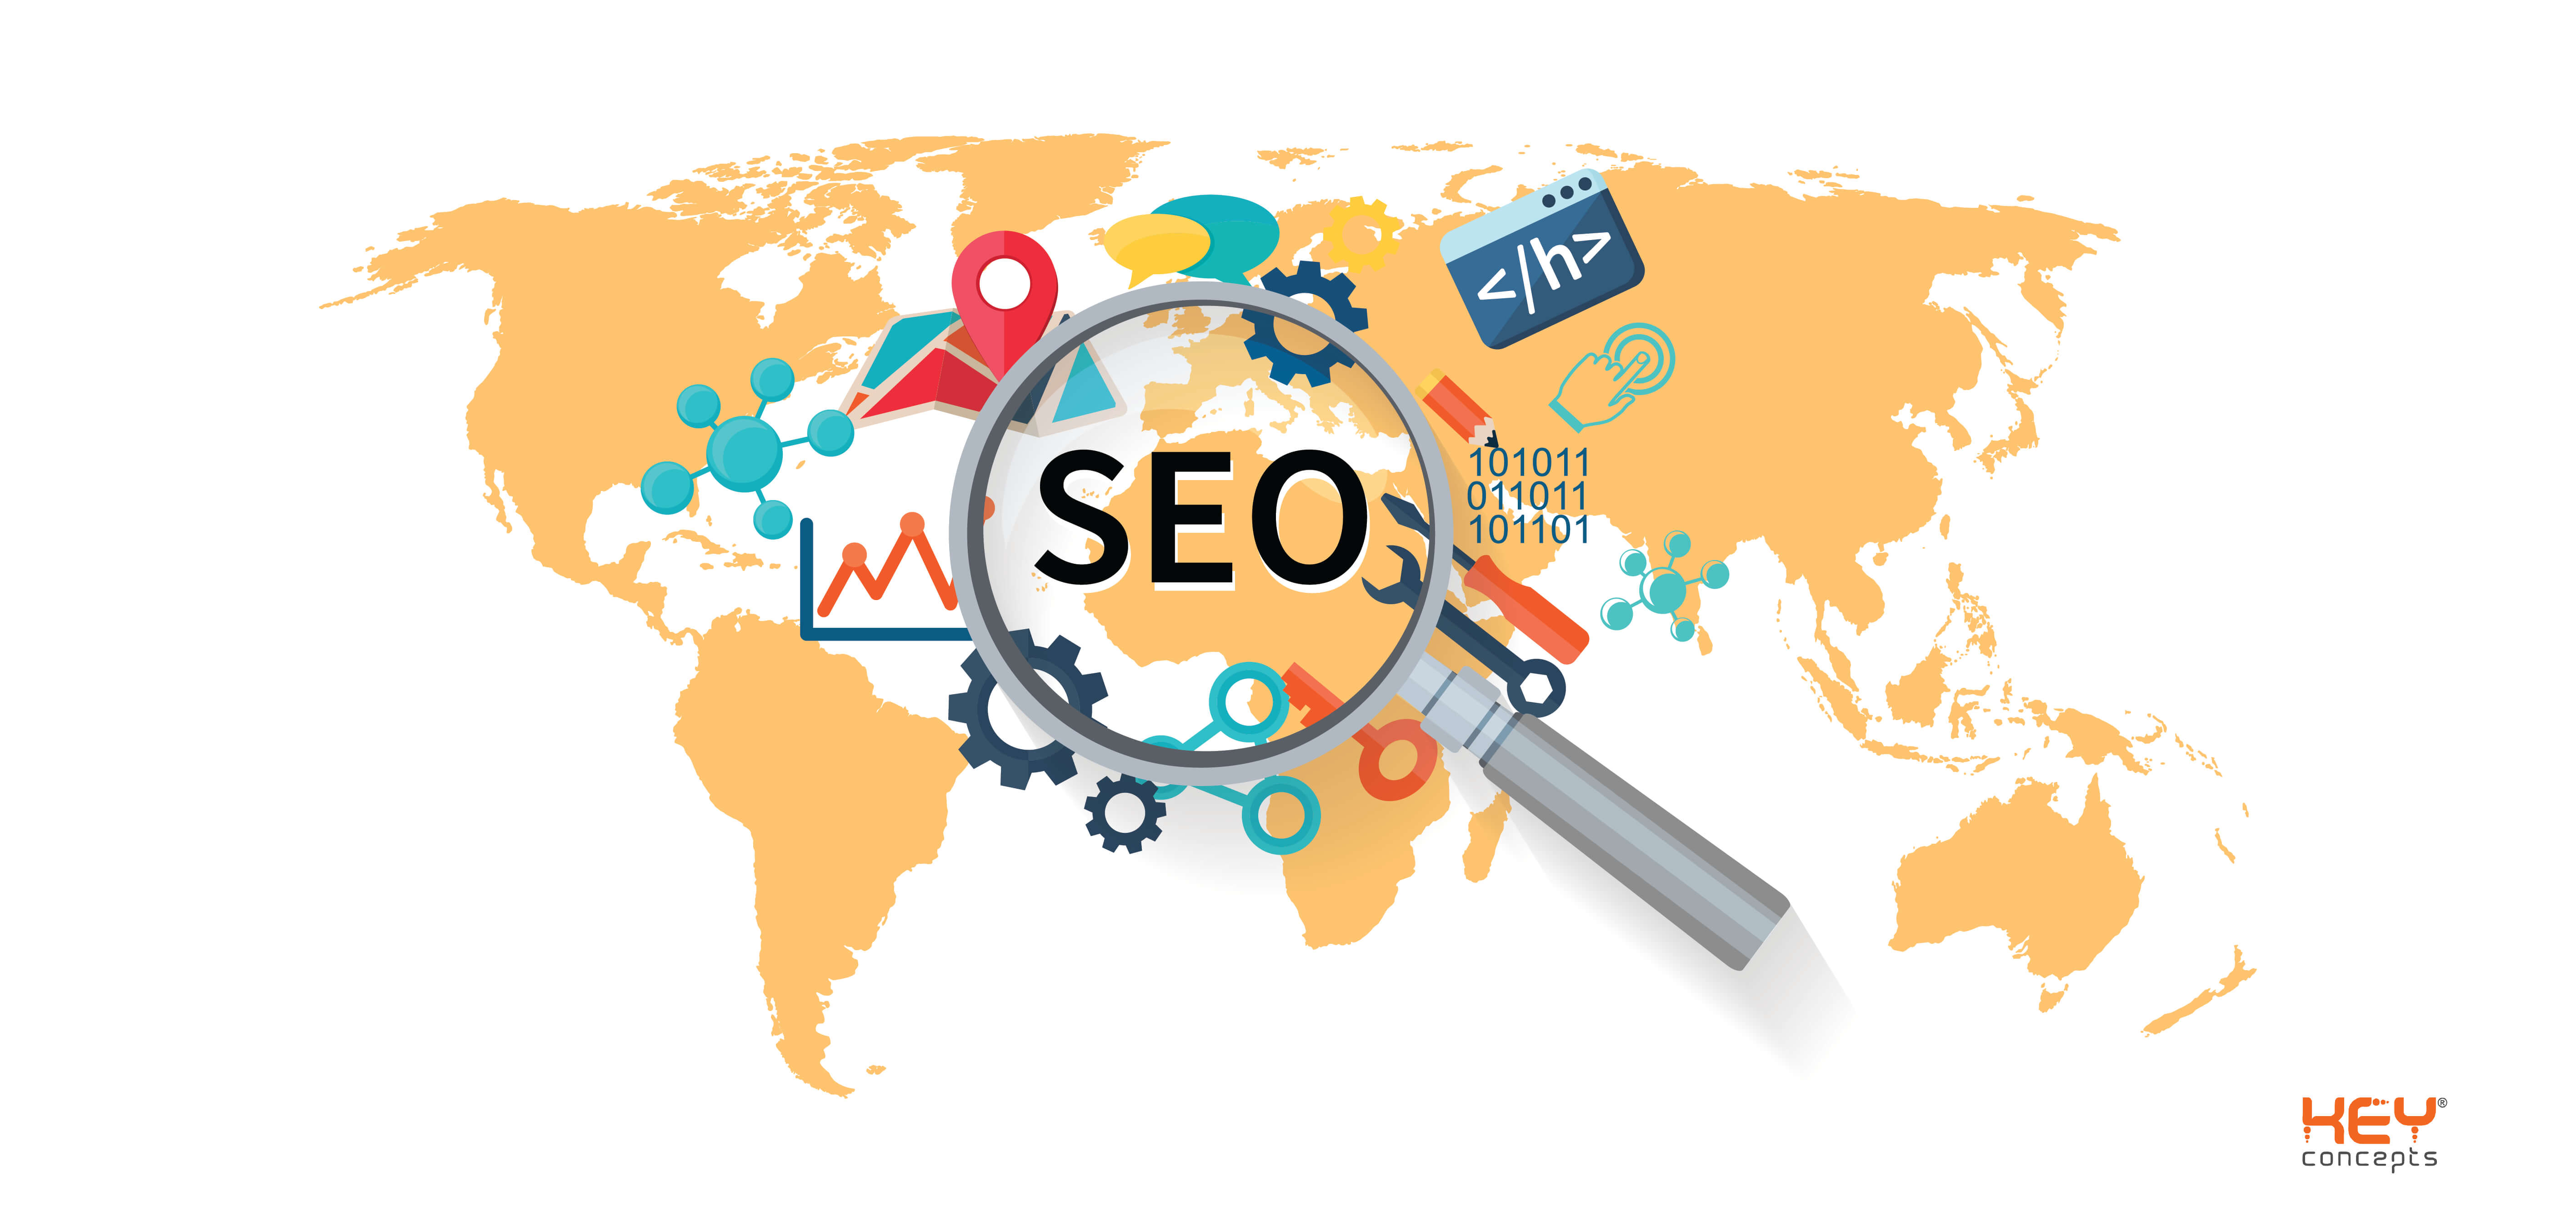 SEO FOR YOUR WEBSITE AND TURN IT INTO ONE OF THE GREATEST ASSET